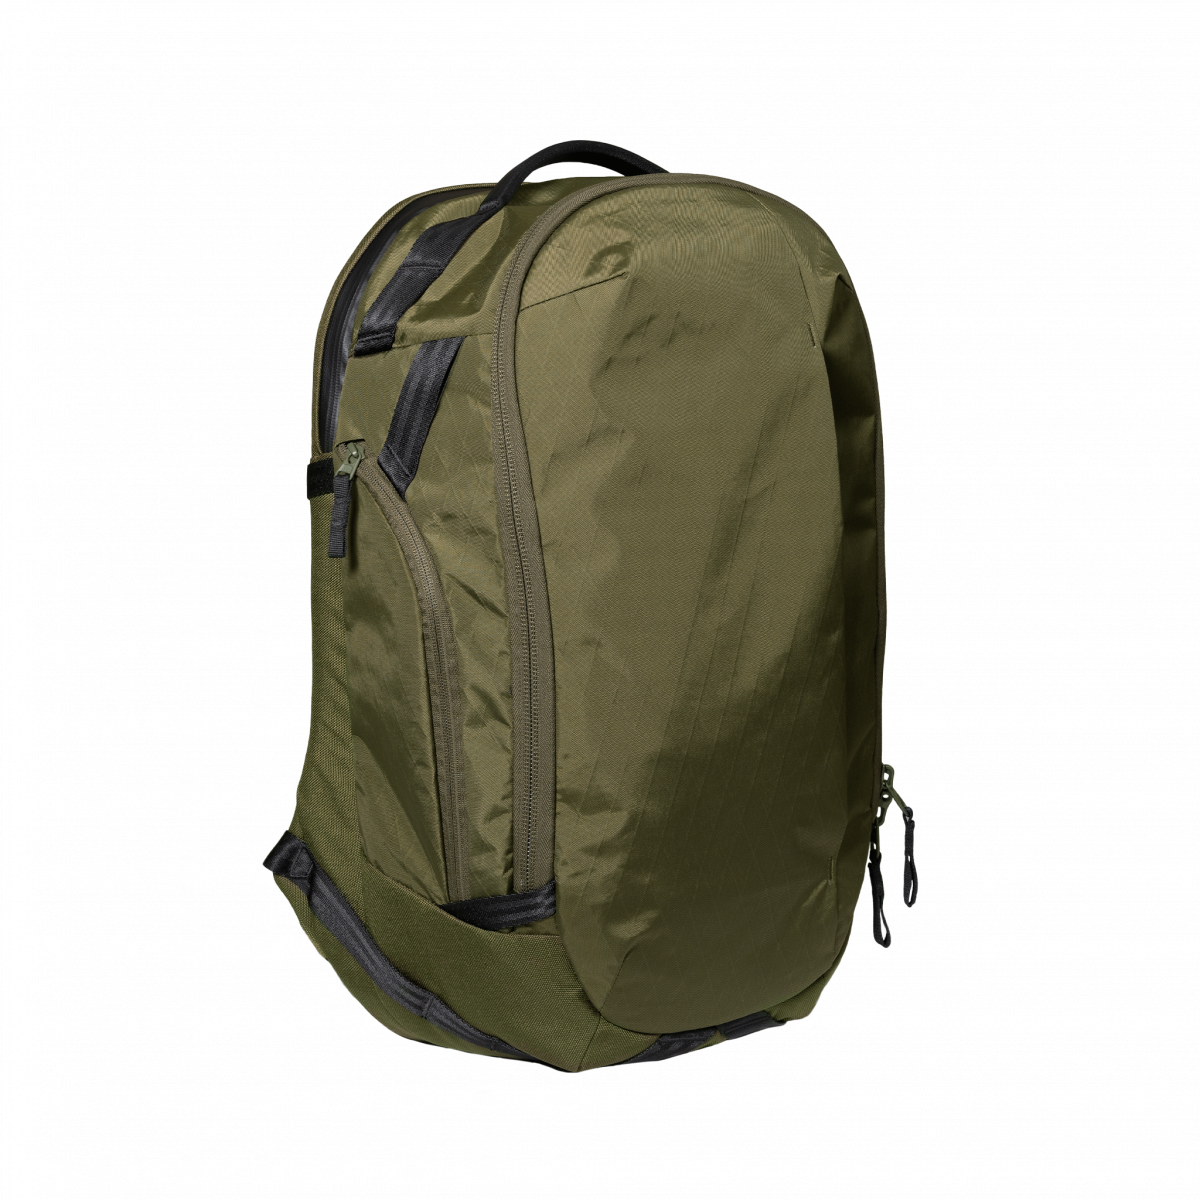 Able Carry Max Backpack - Mukama